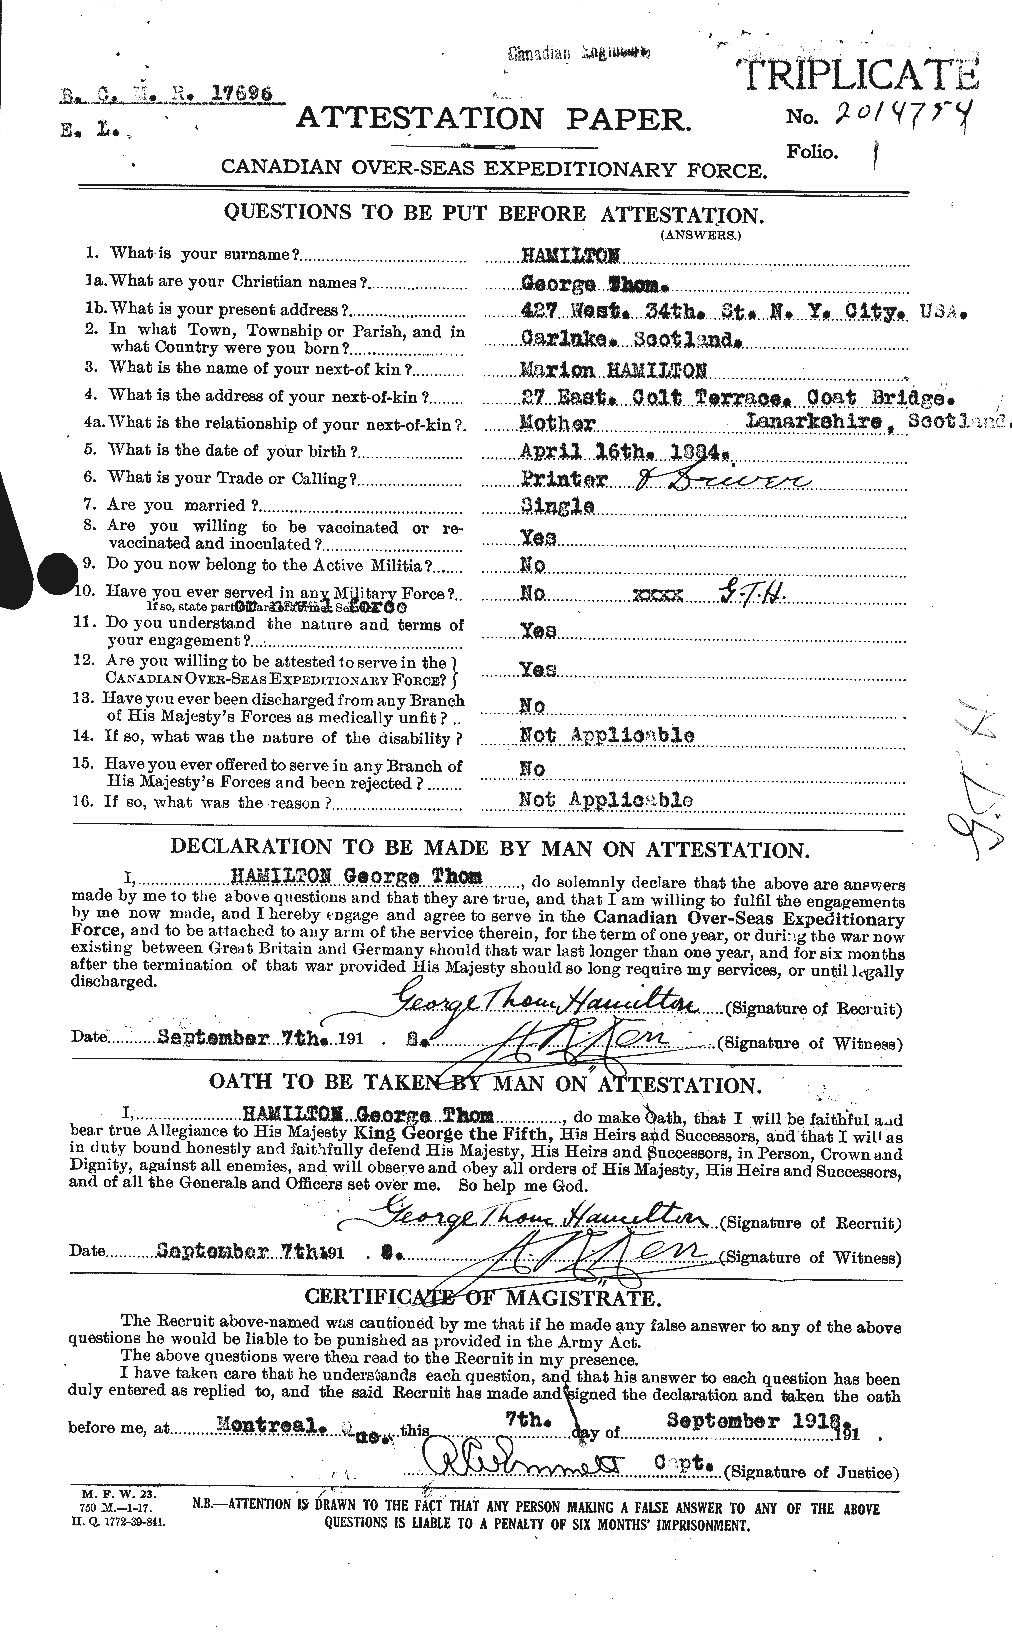 Personnel Records of the First World War - CEF 372475a